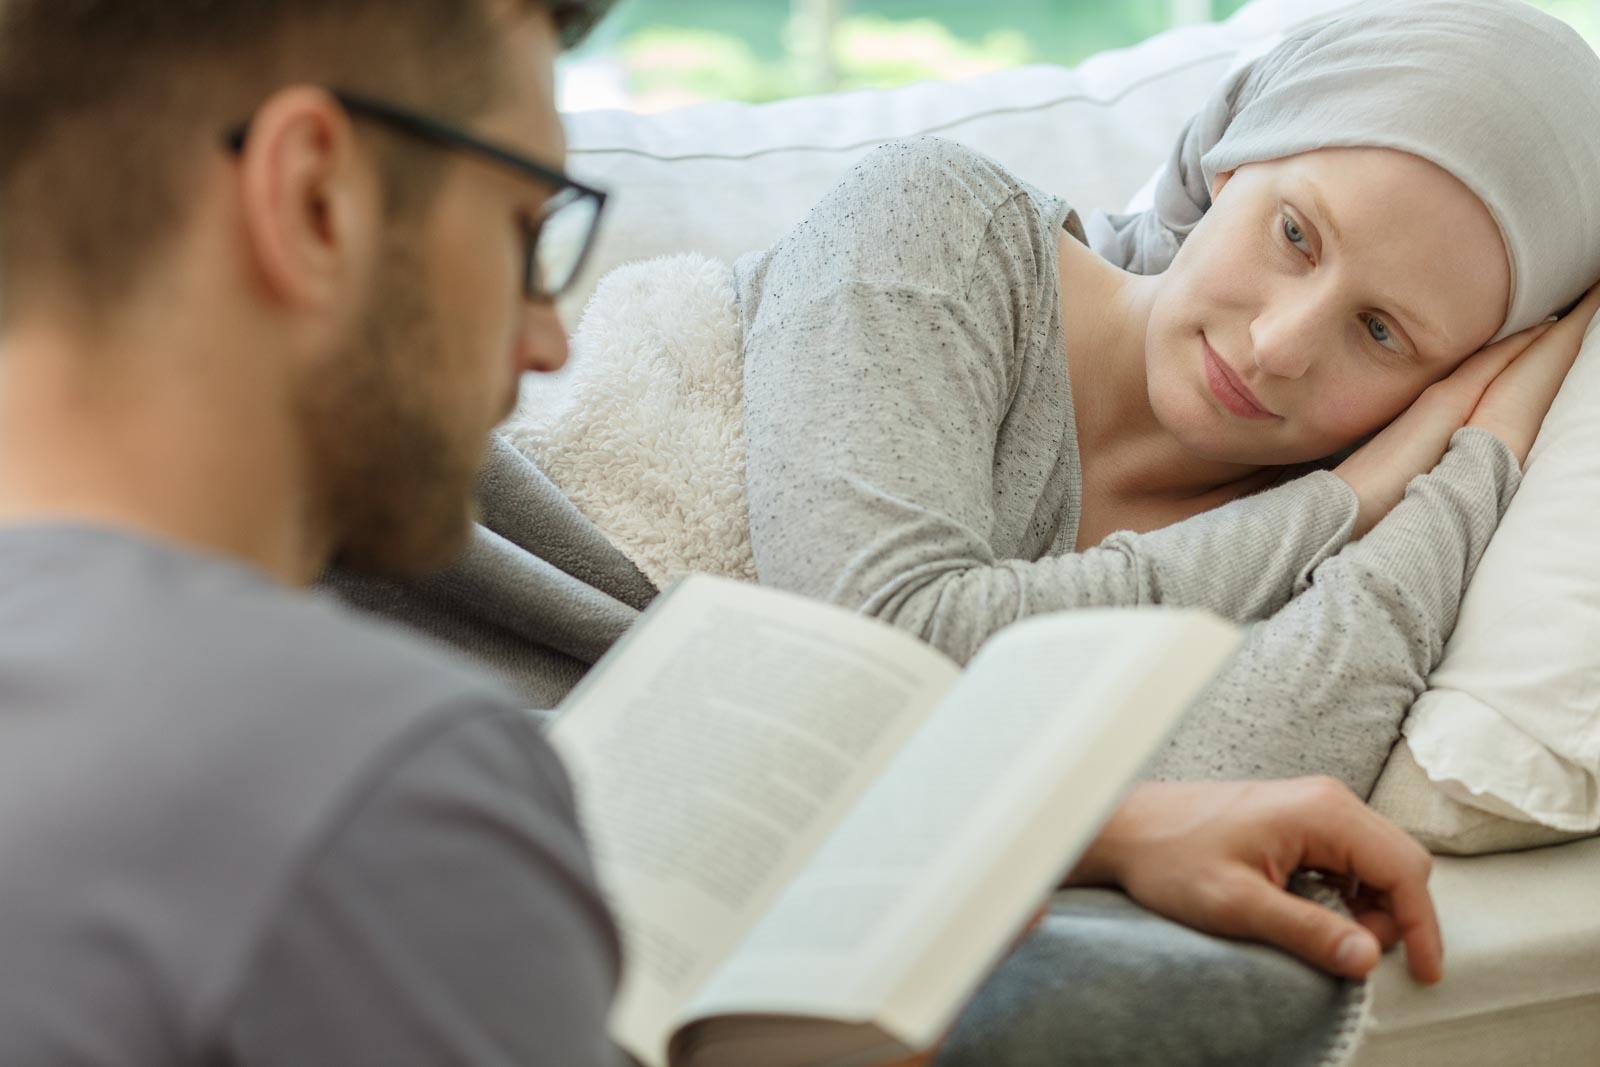 A man reads to a woman who is laying on a couch.